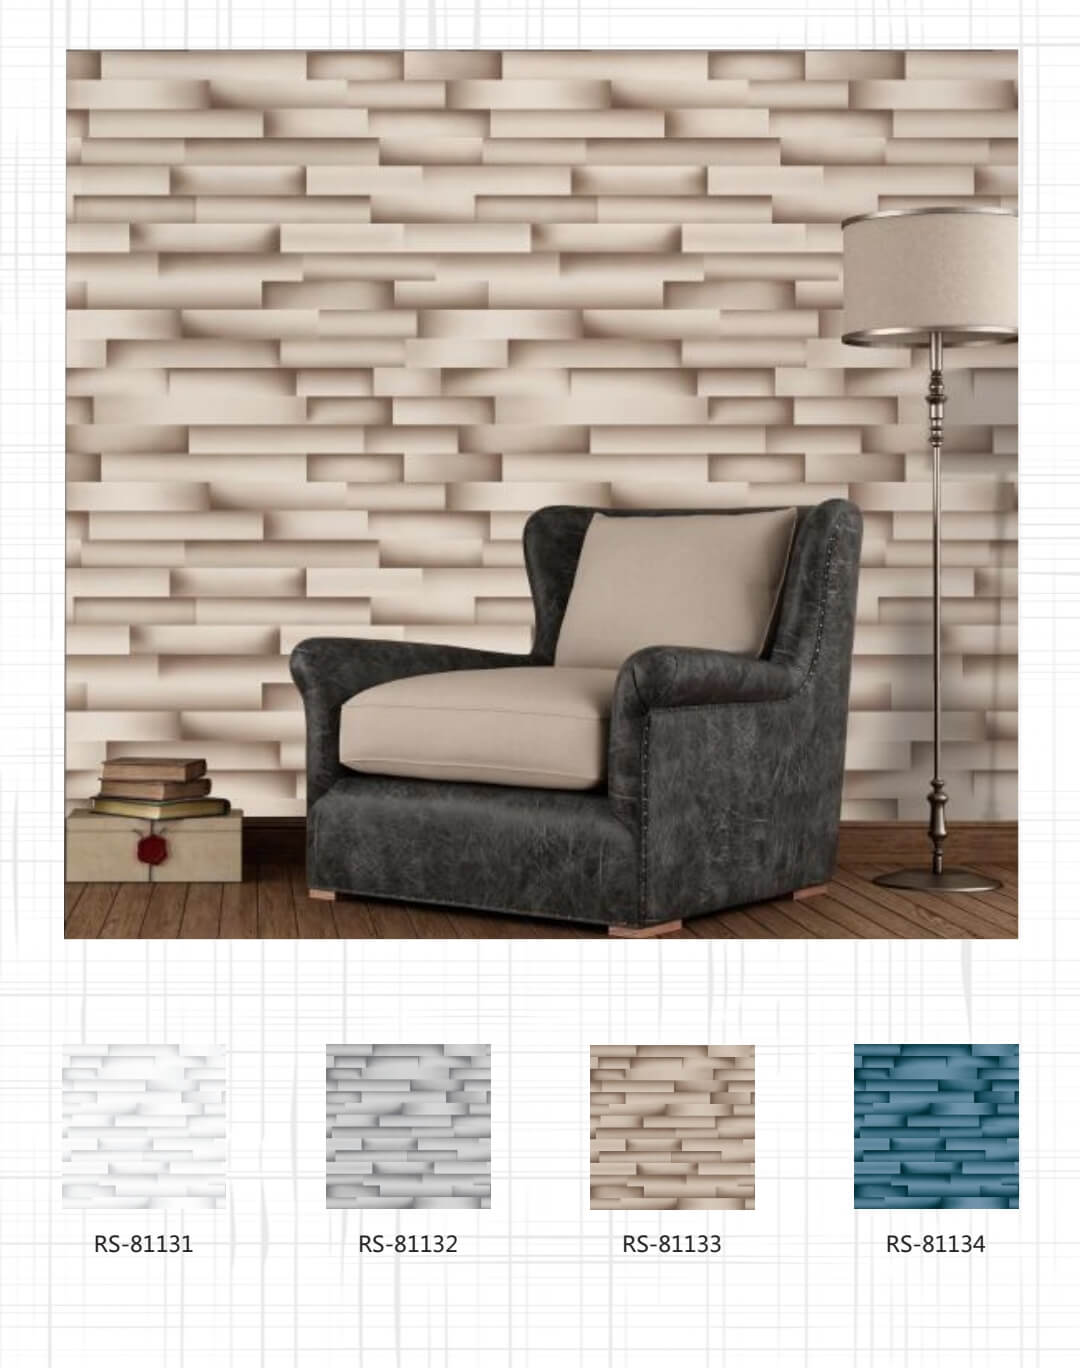 3d Effect Modern Room Wallpaper Wholesale with Stone Designs (1)